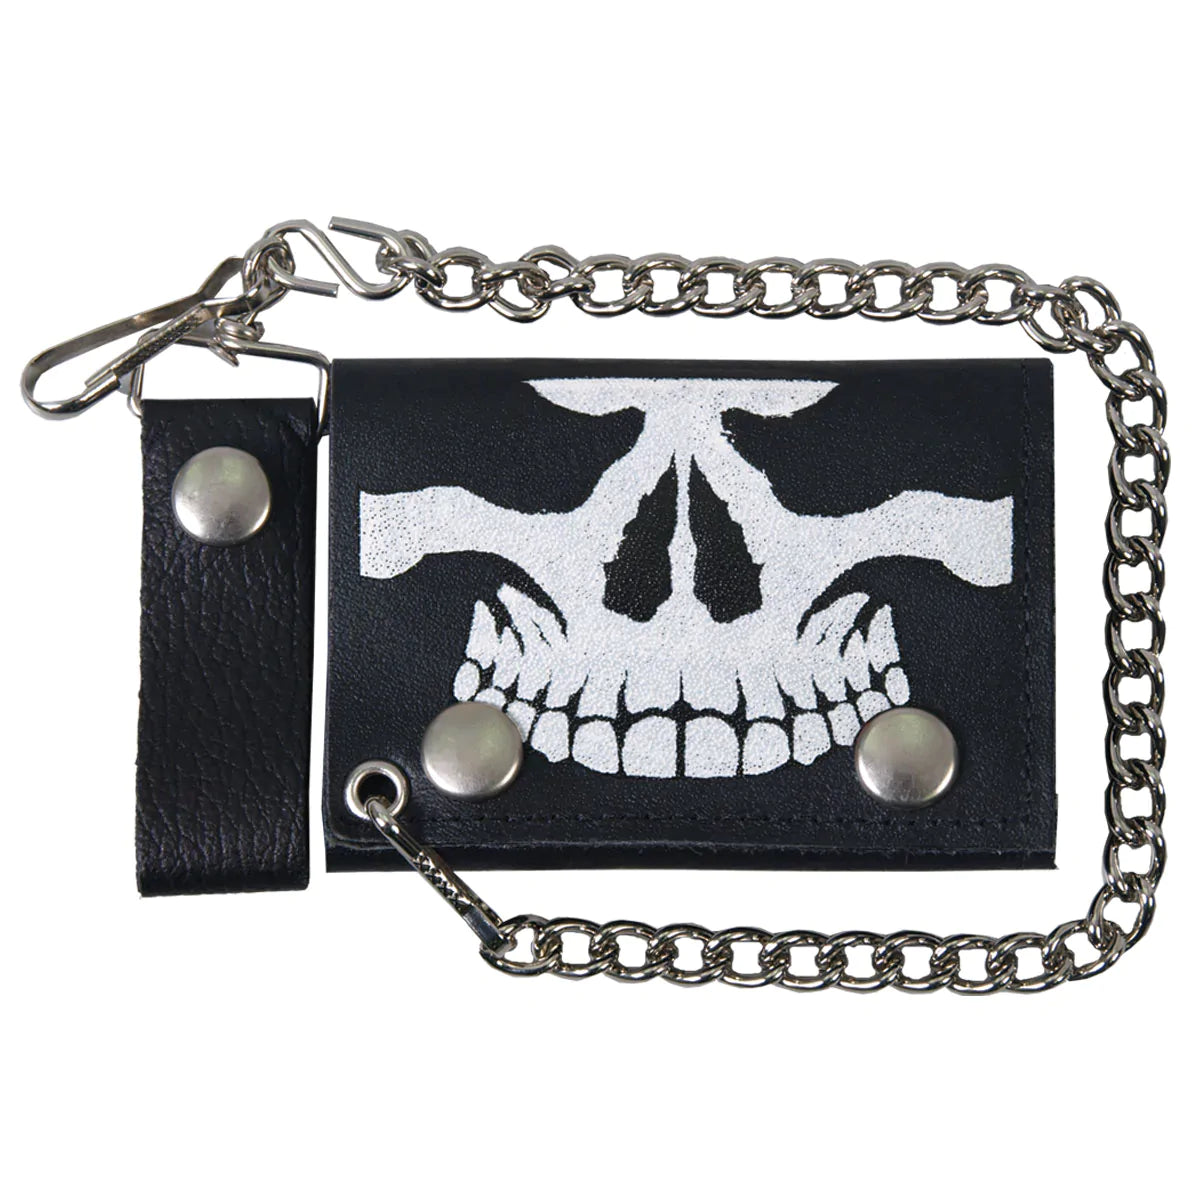 4" Skull Tri-fold WLB1010 Black Leather Tri-Fold Wallet with Chain | Hot Leathers